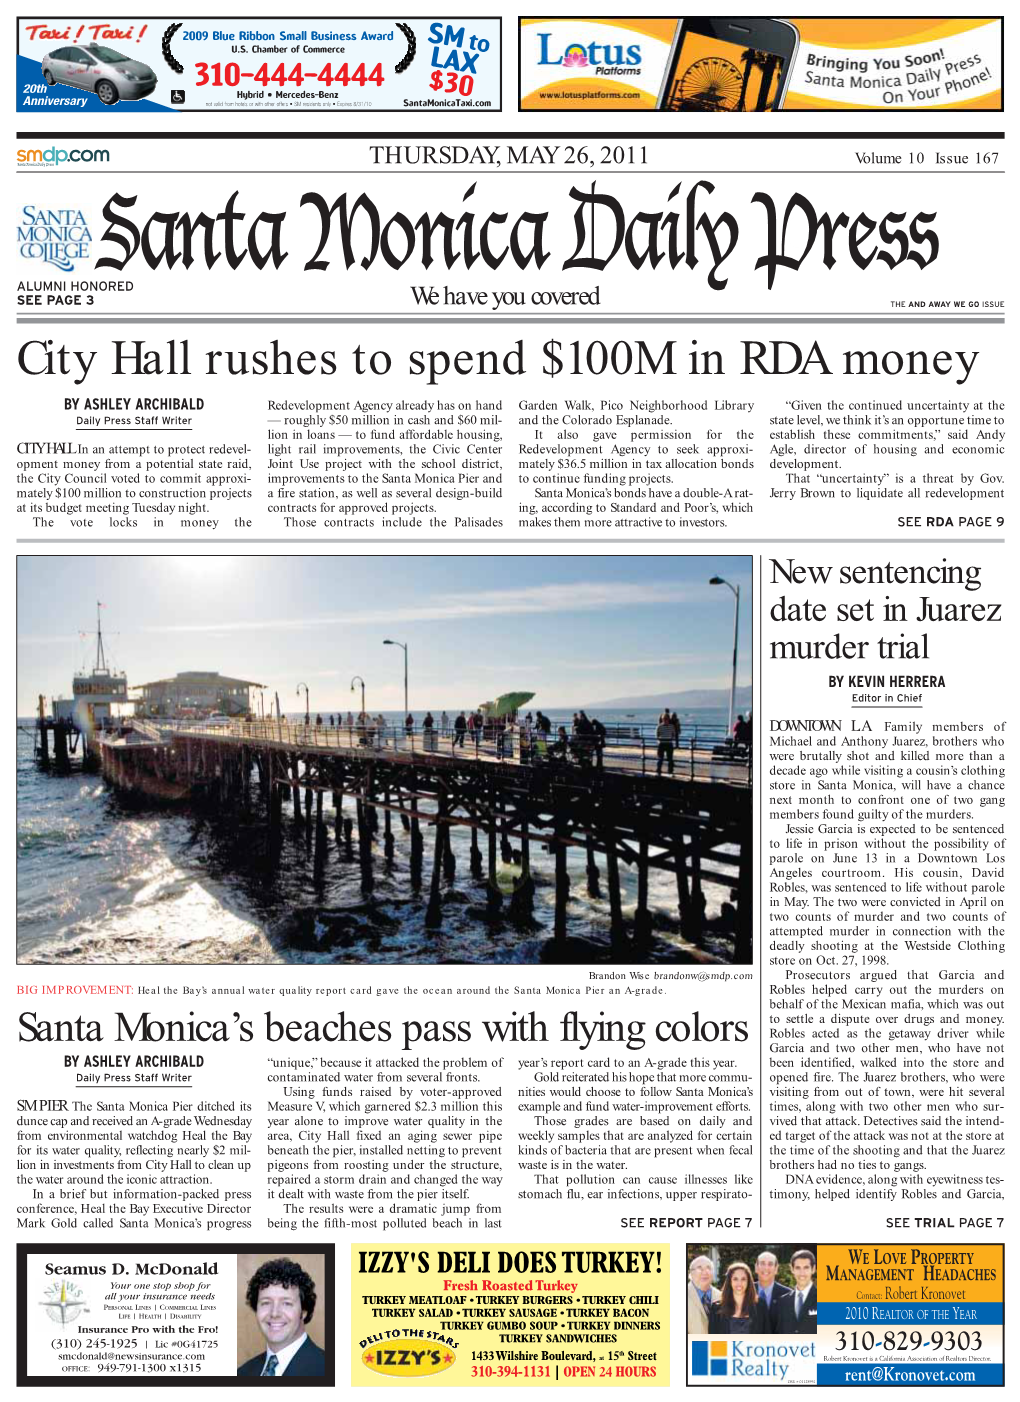 Santa Monica Daily Press ALUMNI HONORED SEE PAGE 3 We Have You Covered the and AWAY WE GO ISSUE City Hall Rushes to Spend $100M in RDA Money